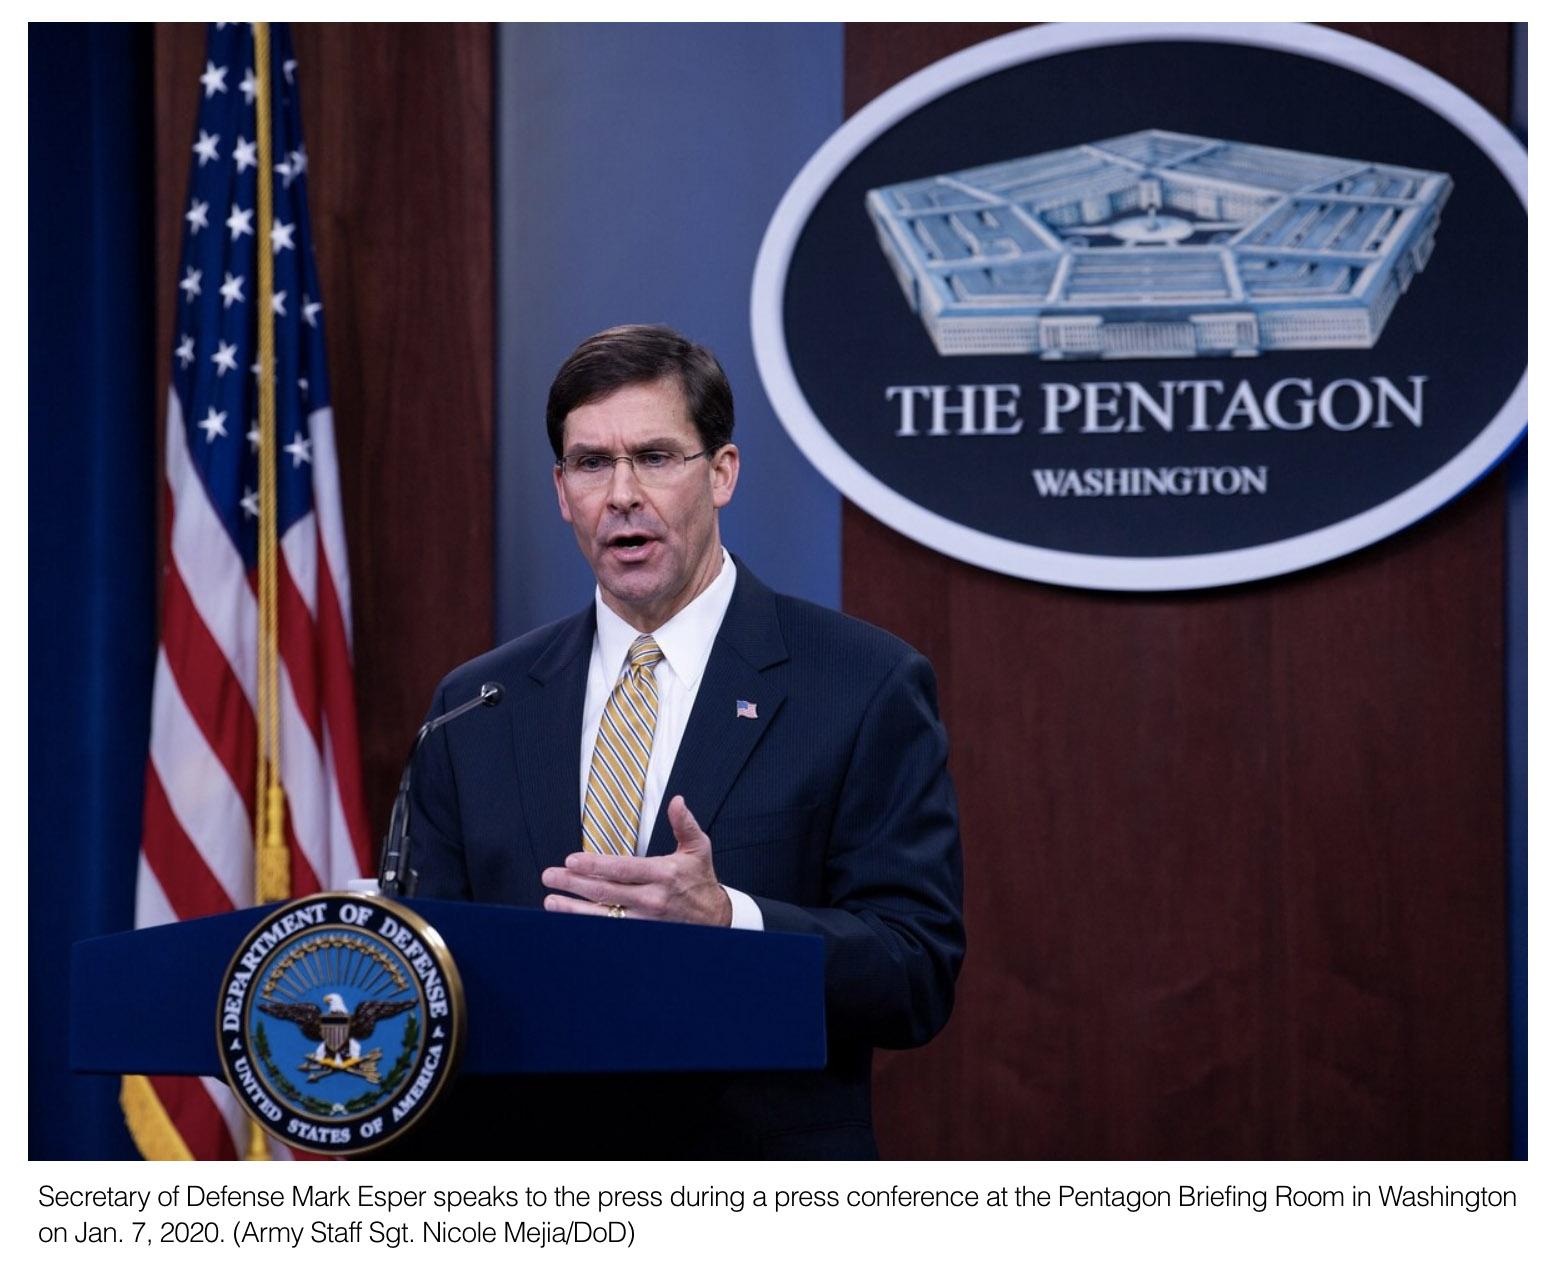  Esper says no decisions have been finalized on AFRICOM changes